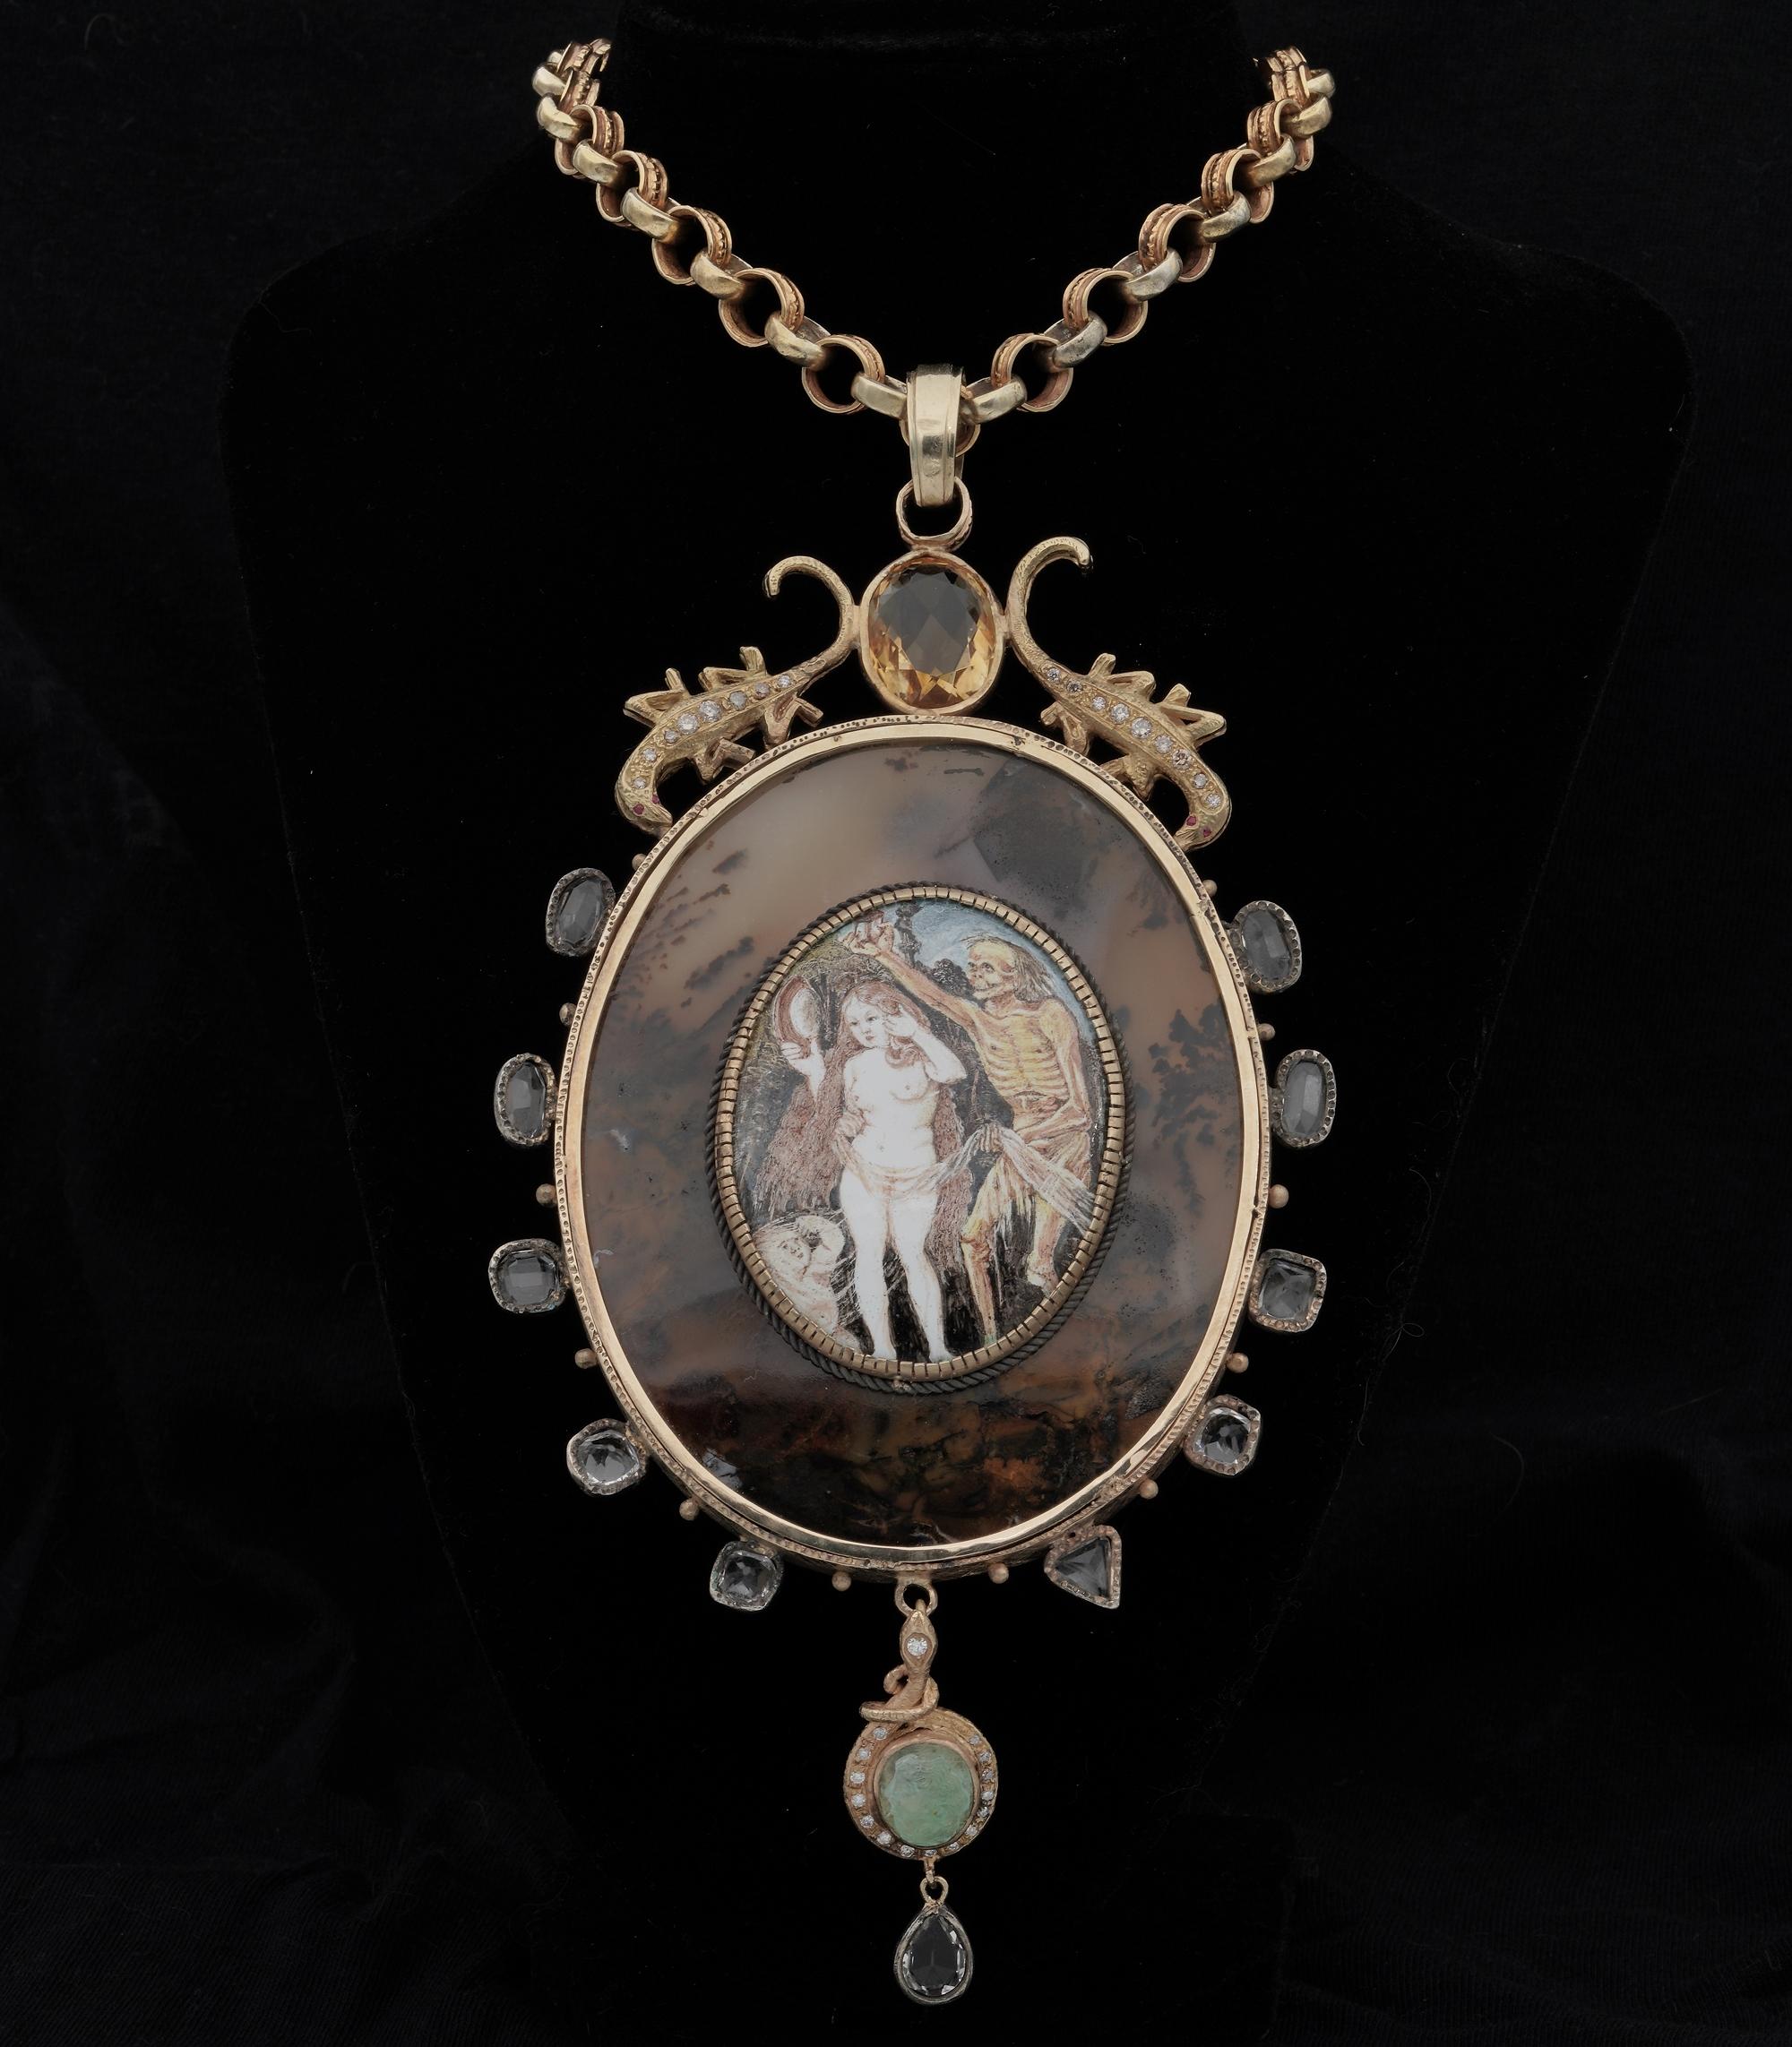 Attilio Codognato

Large double face Memento Mori Medallion with matched chain
Hand crafted of solid 14 Kt and silver depicting two Memento Mori enamelled scenes embellished by Rock Crystal Diamonds Citrine and Dendritic Agate and Carnelian
One side